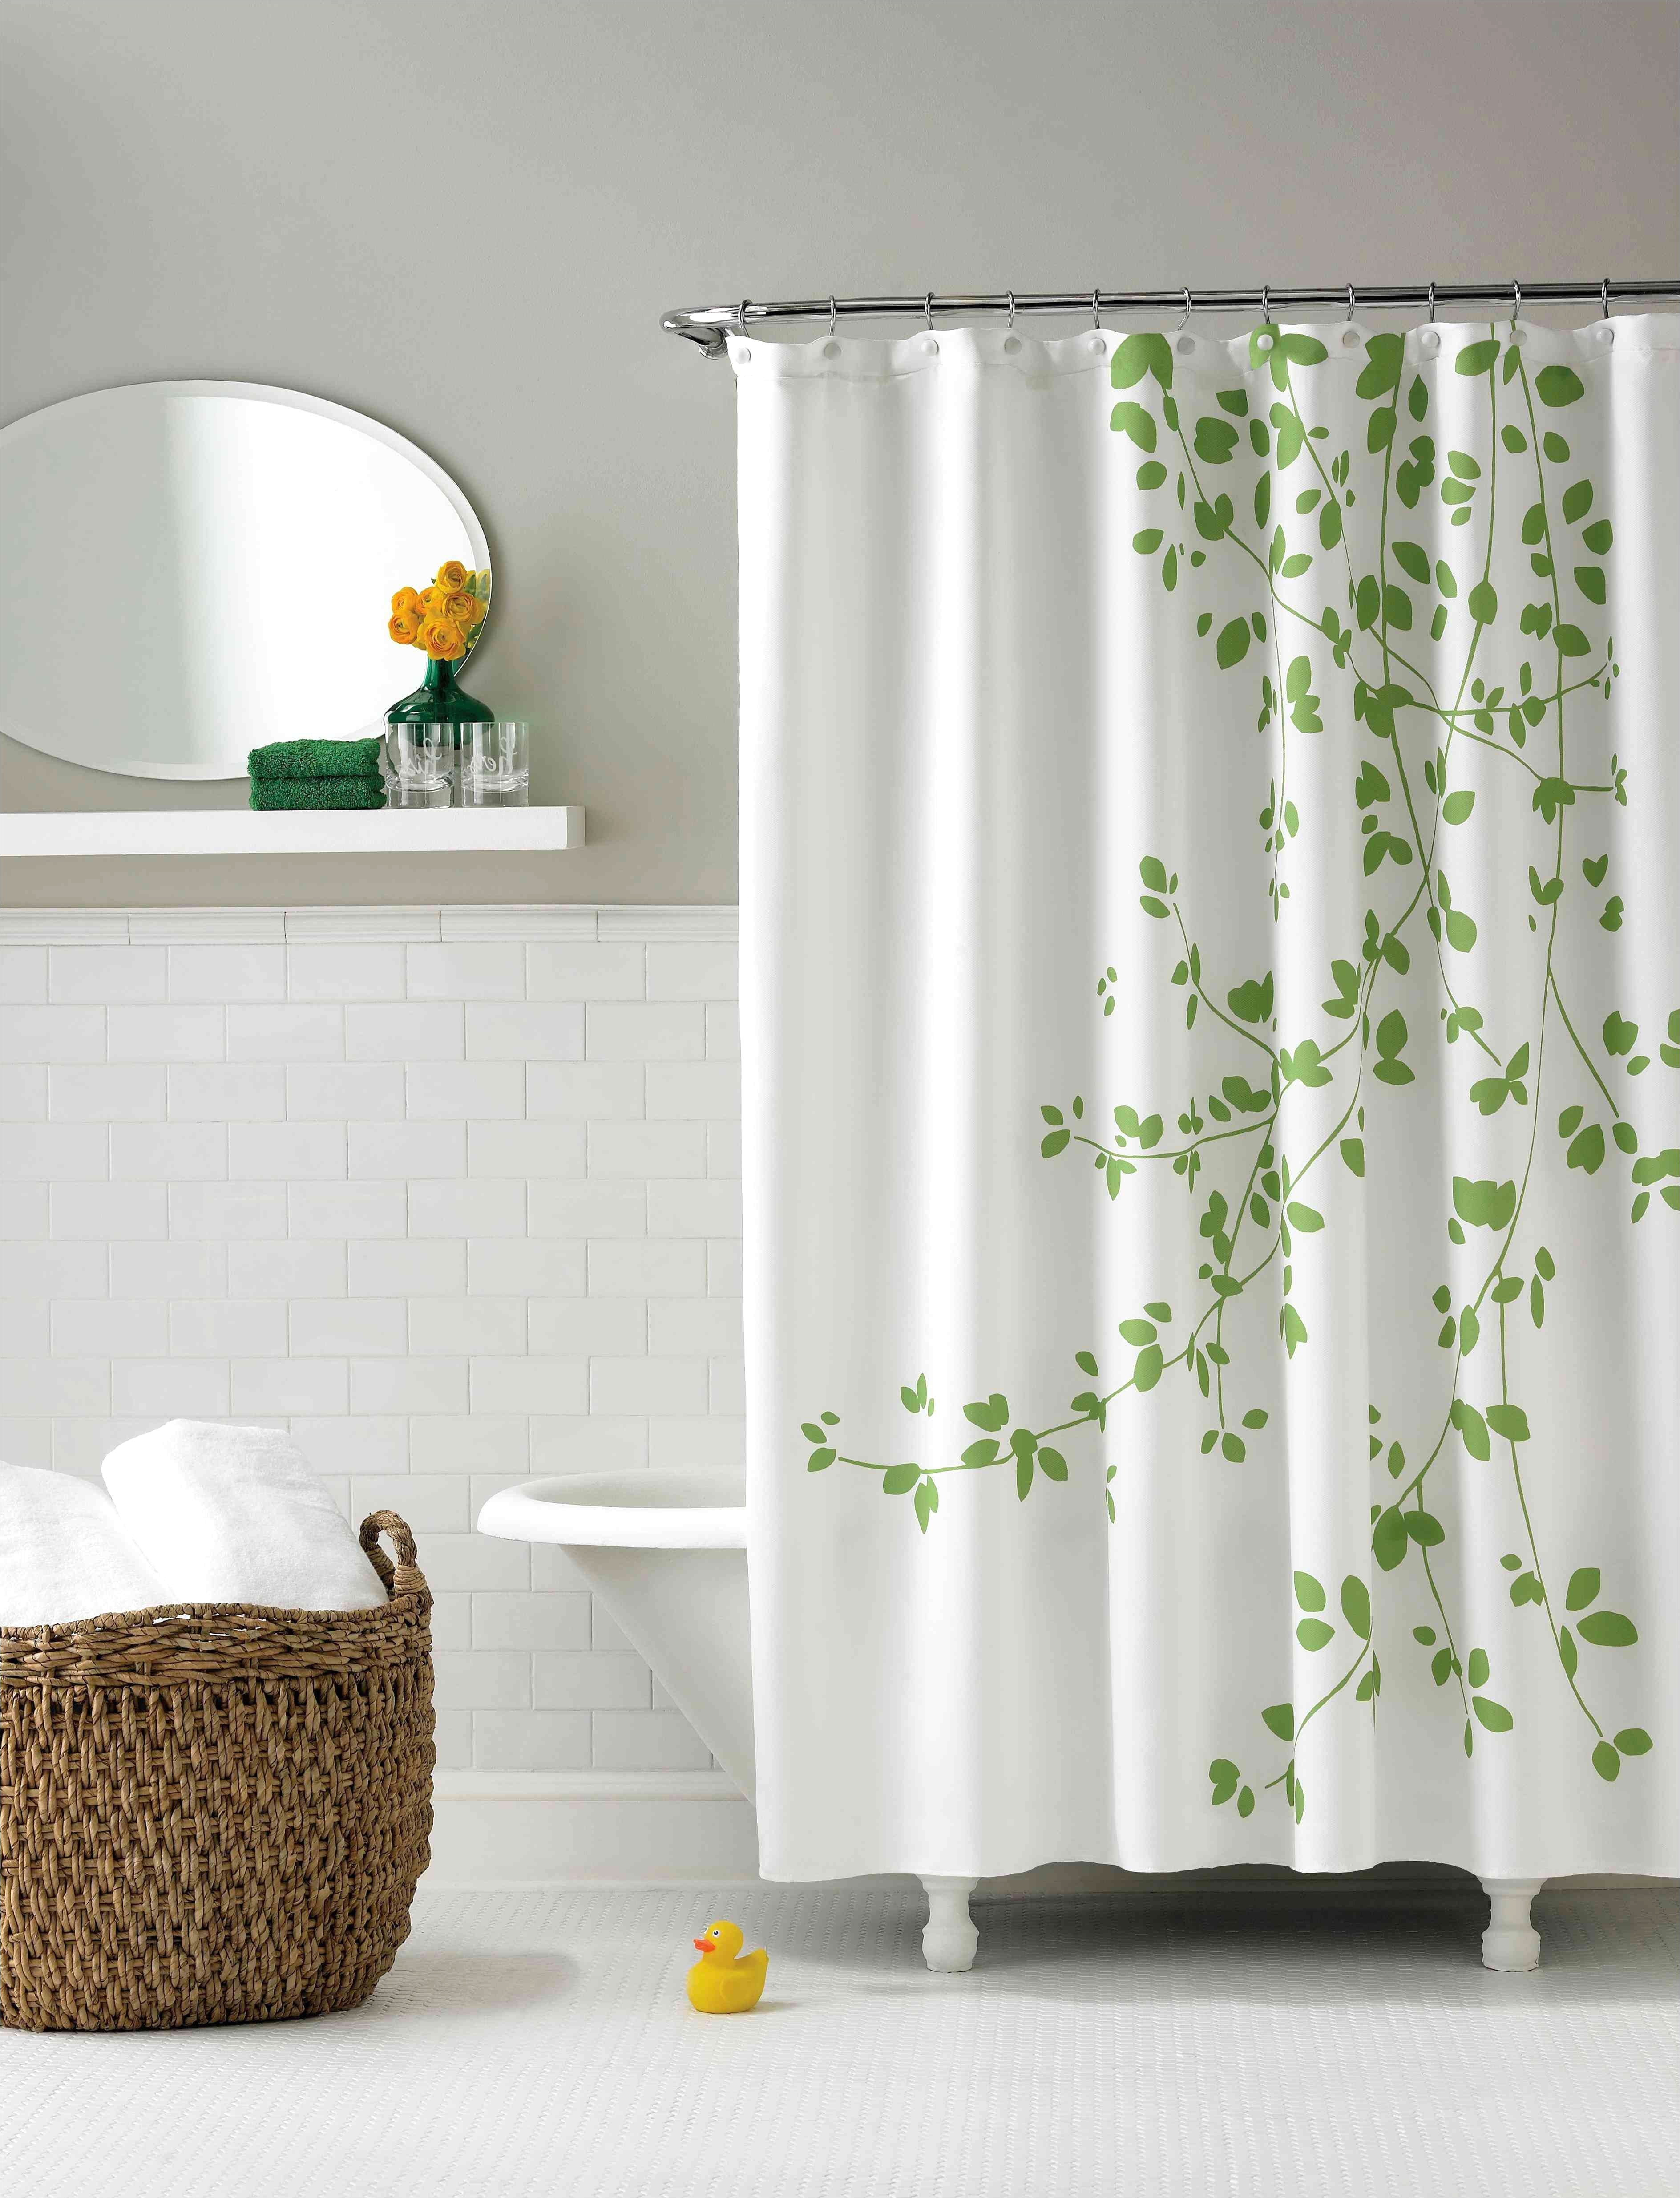 27 coolest shower curtains longer than 72 inches ideas of greek key shower curtain